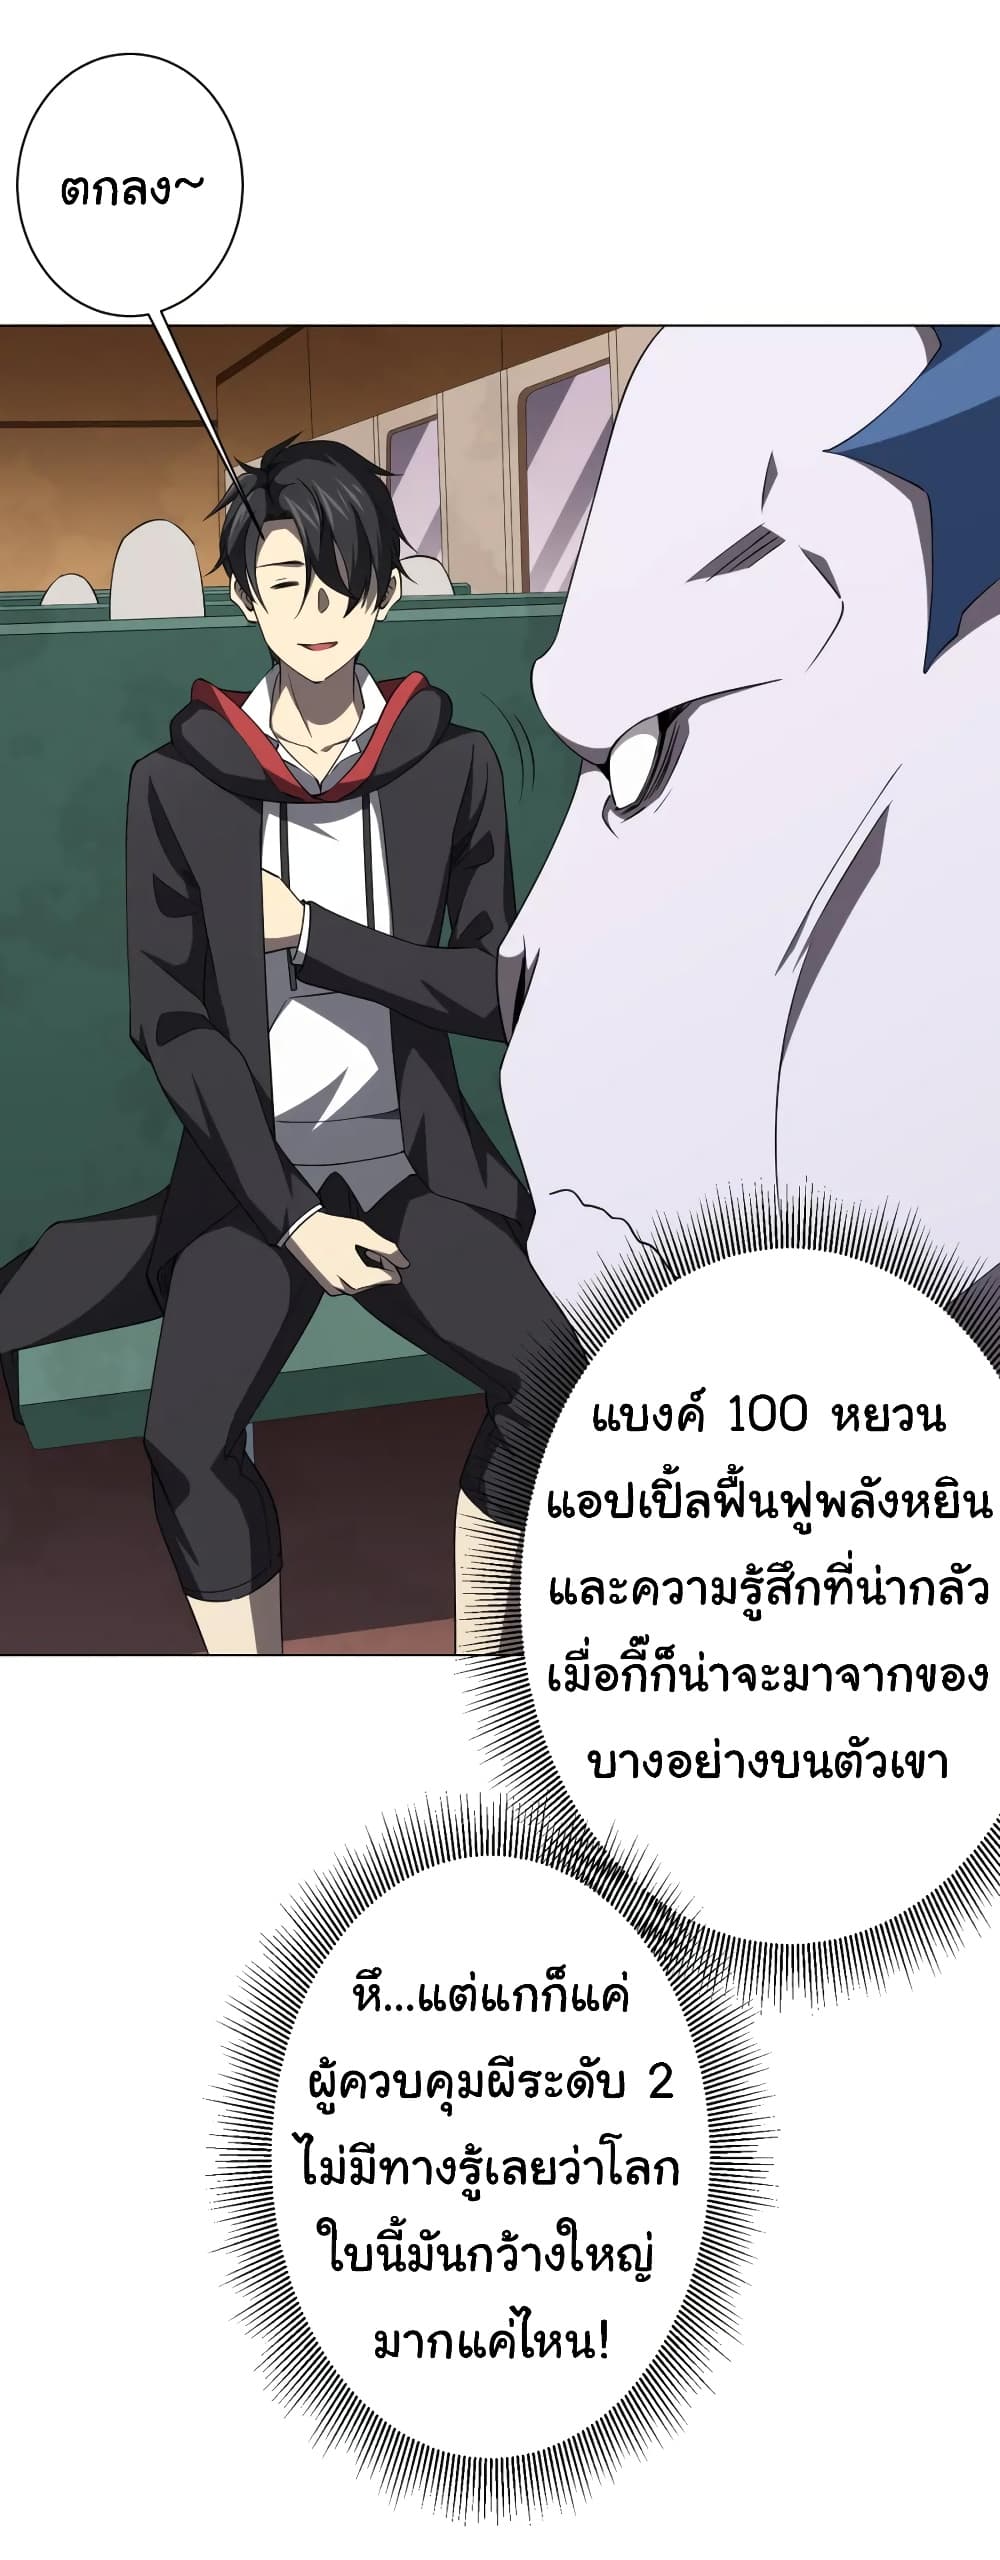 Start with Trillions of Coins ตอนที่ 29 (27)